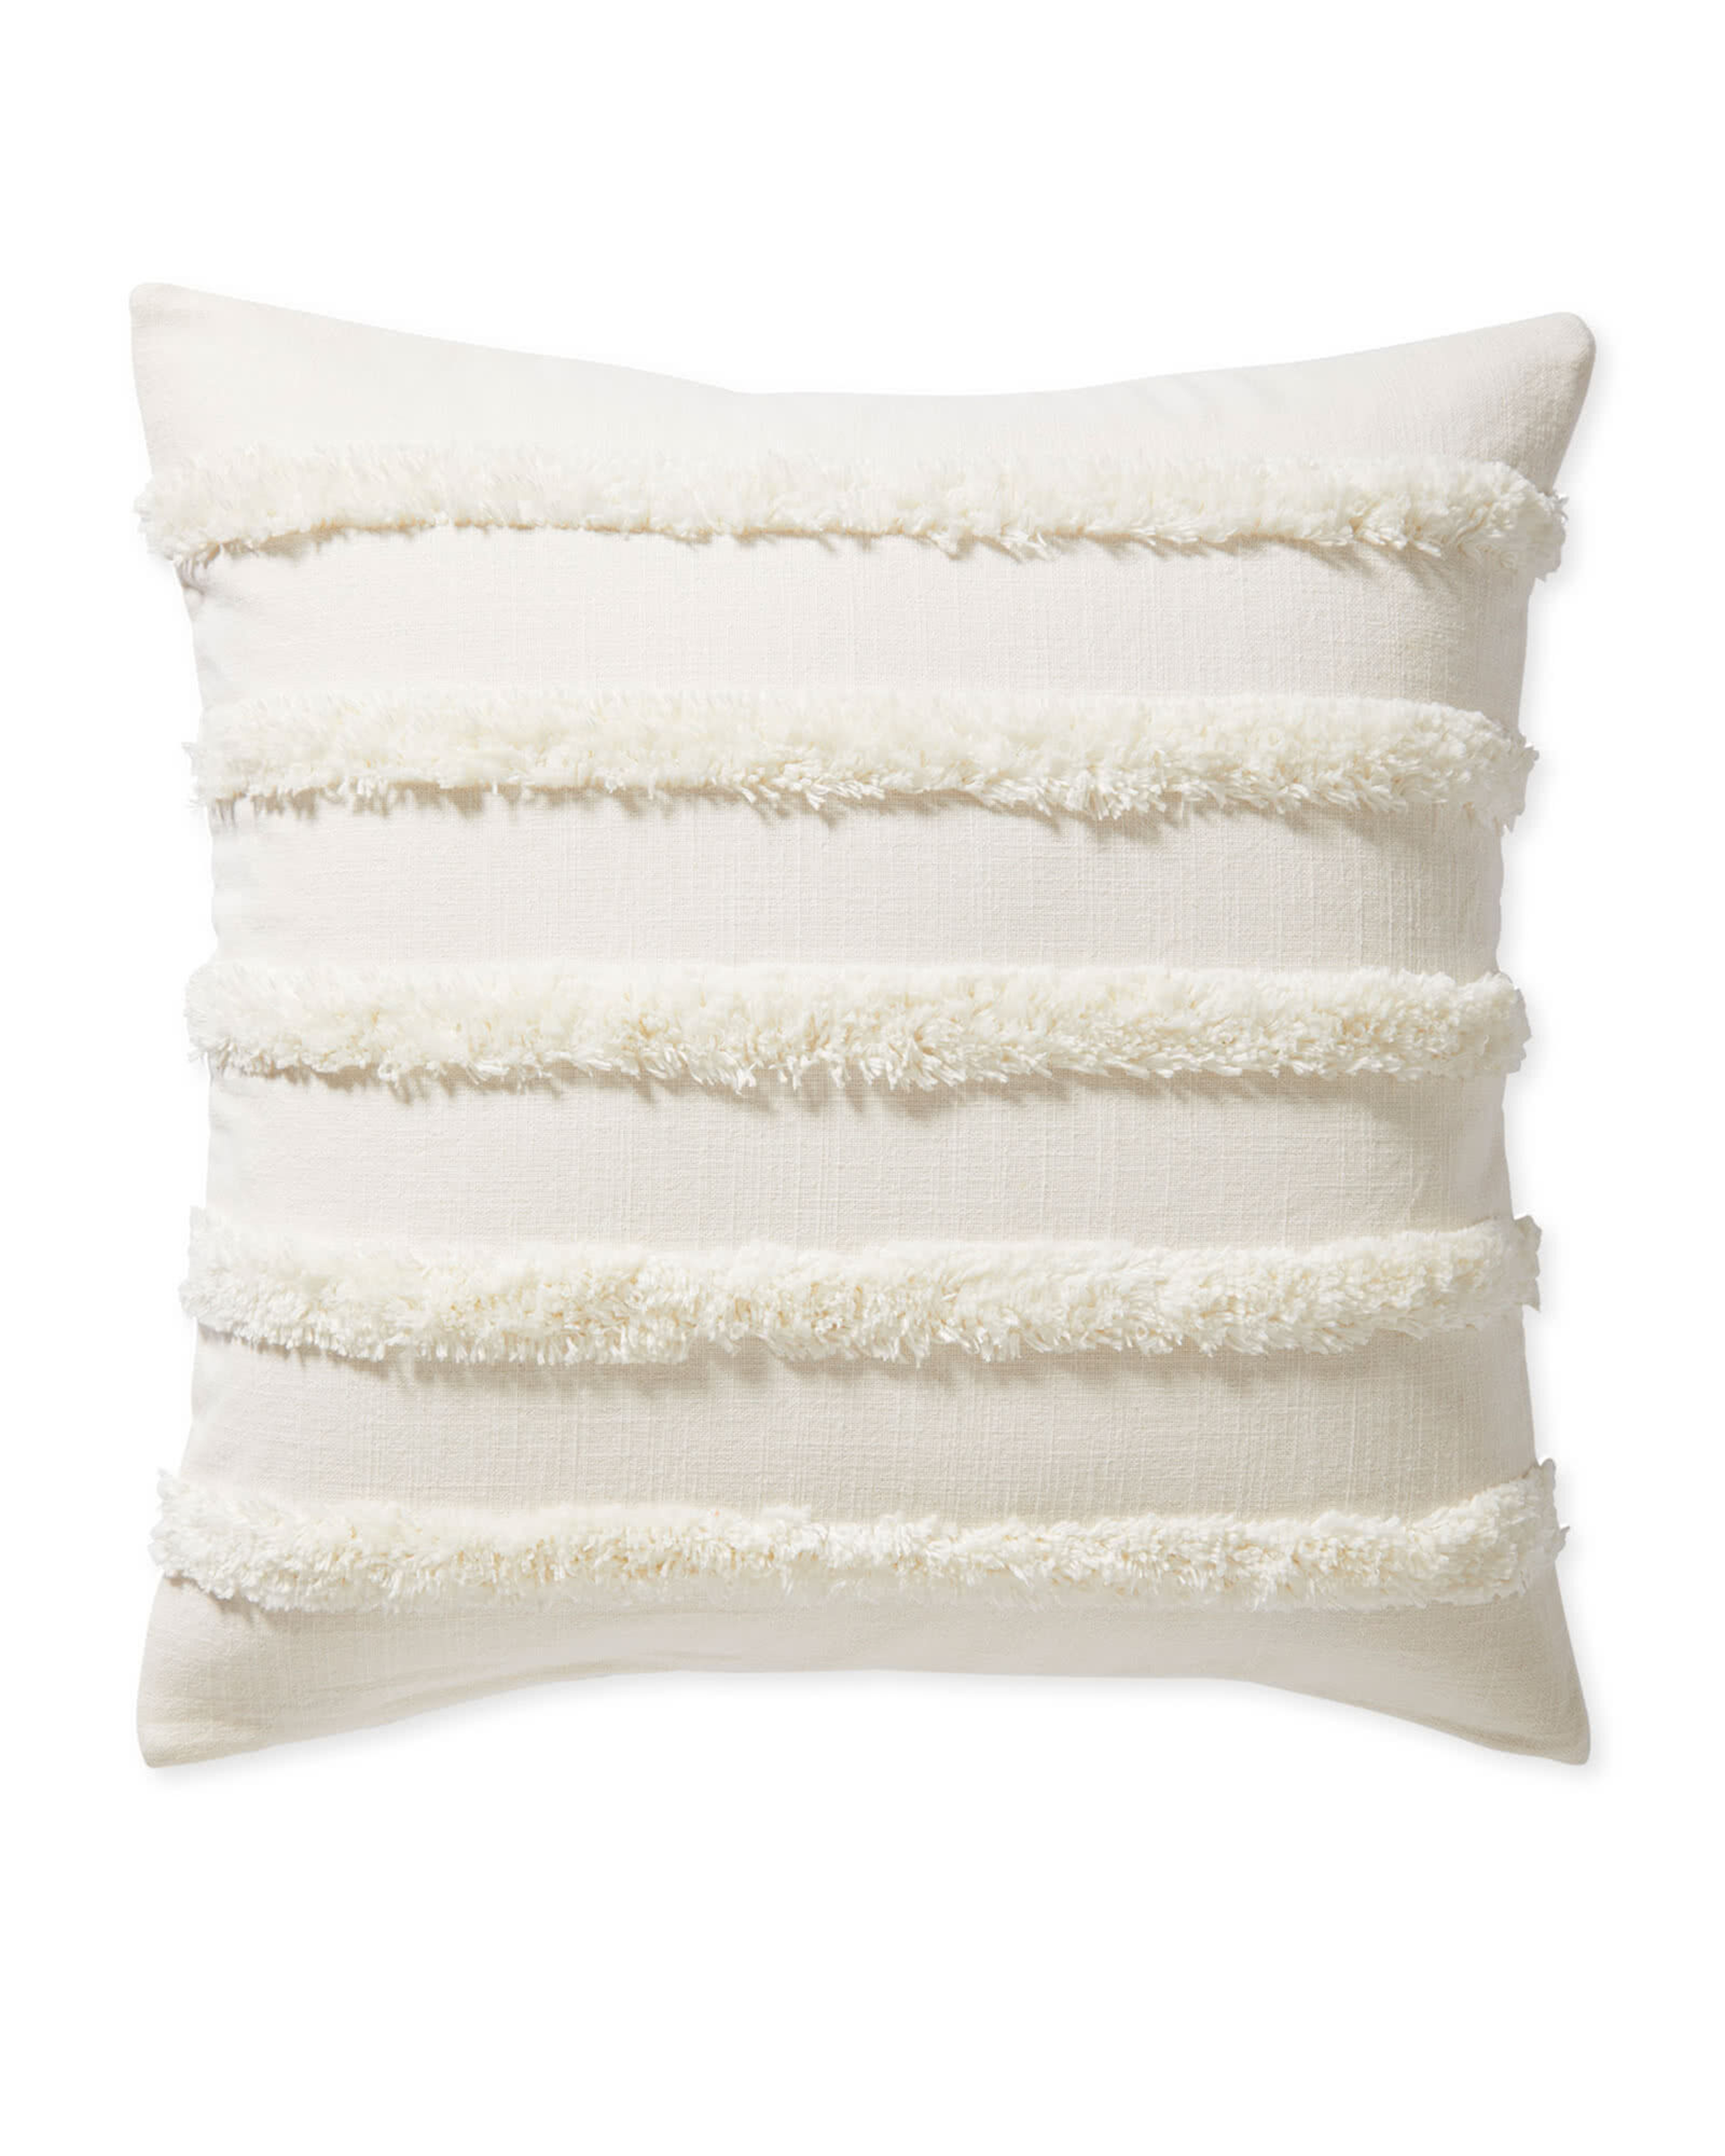 Cuesta Pillow Cover - Serena and Lily